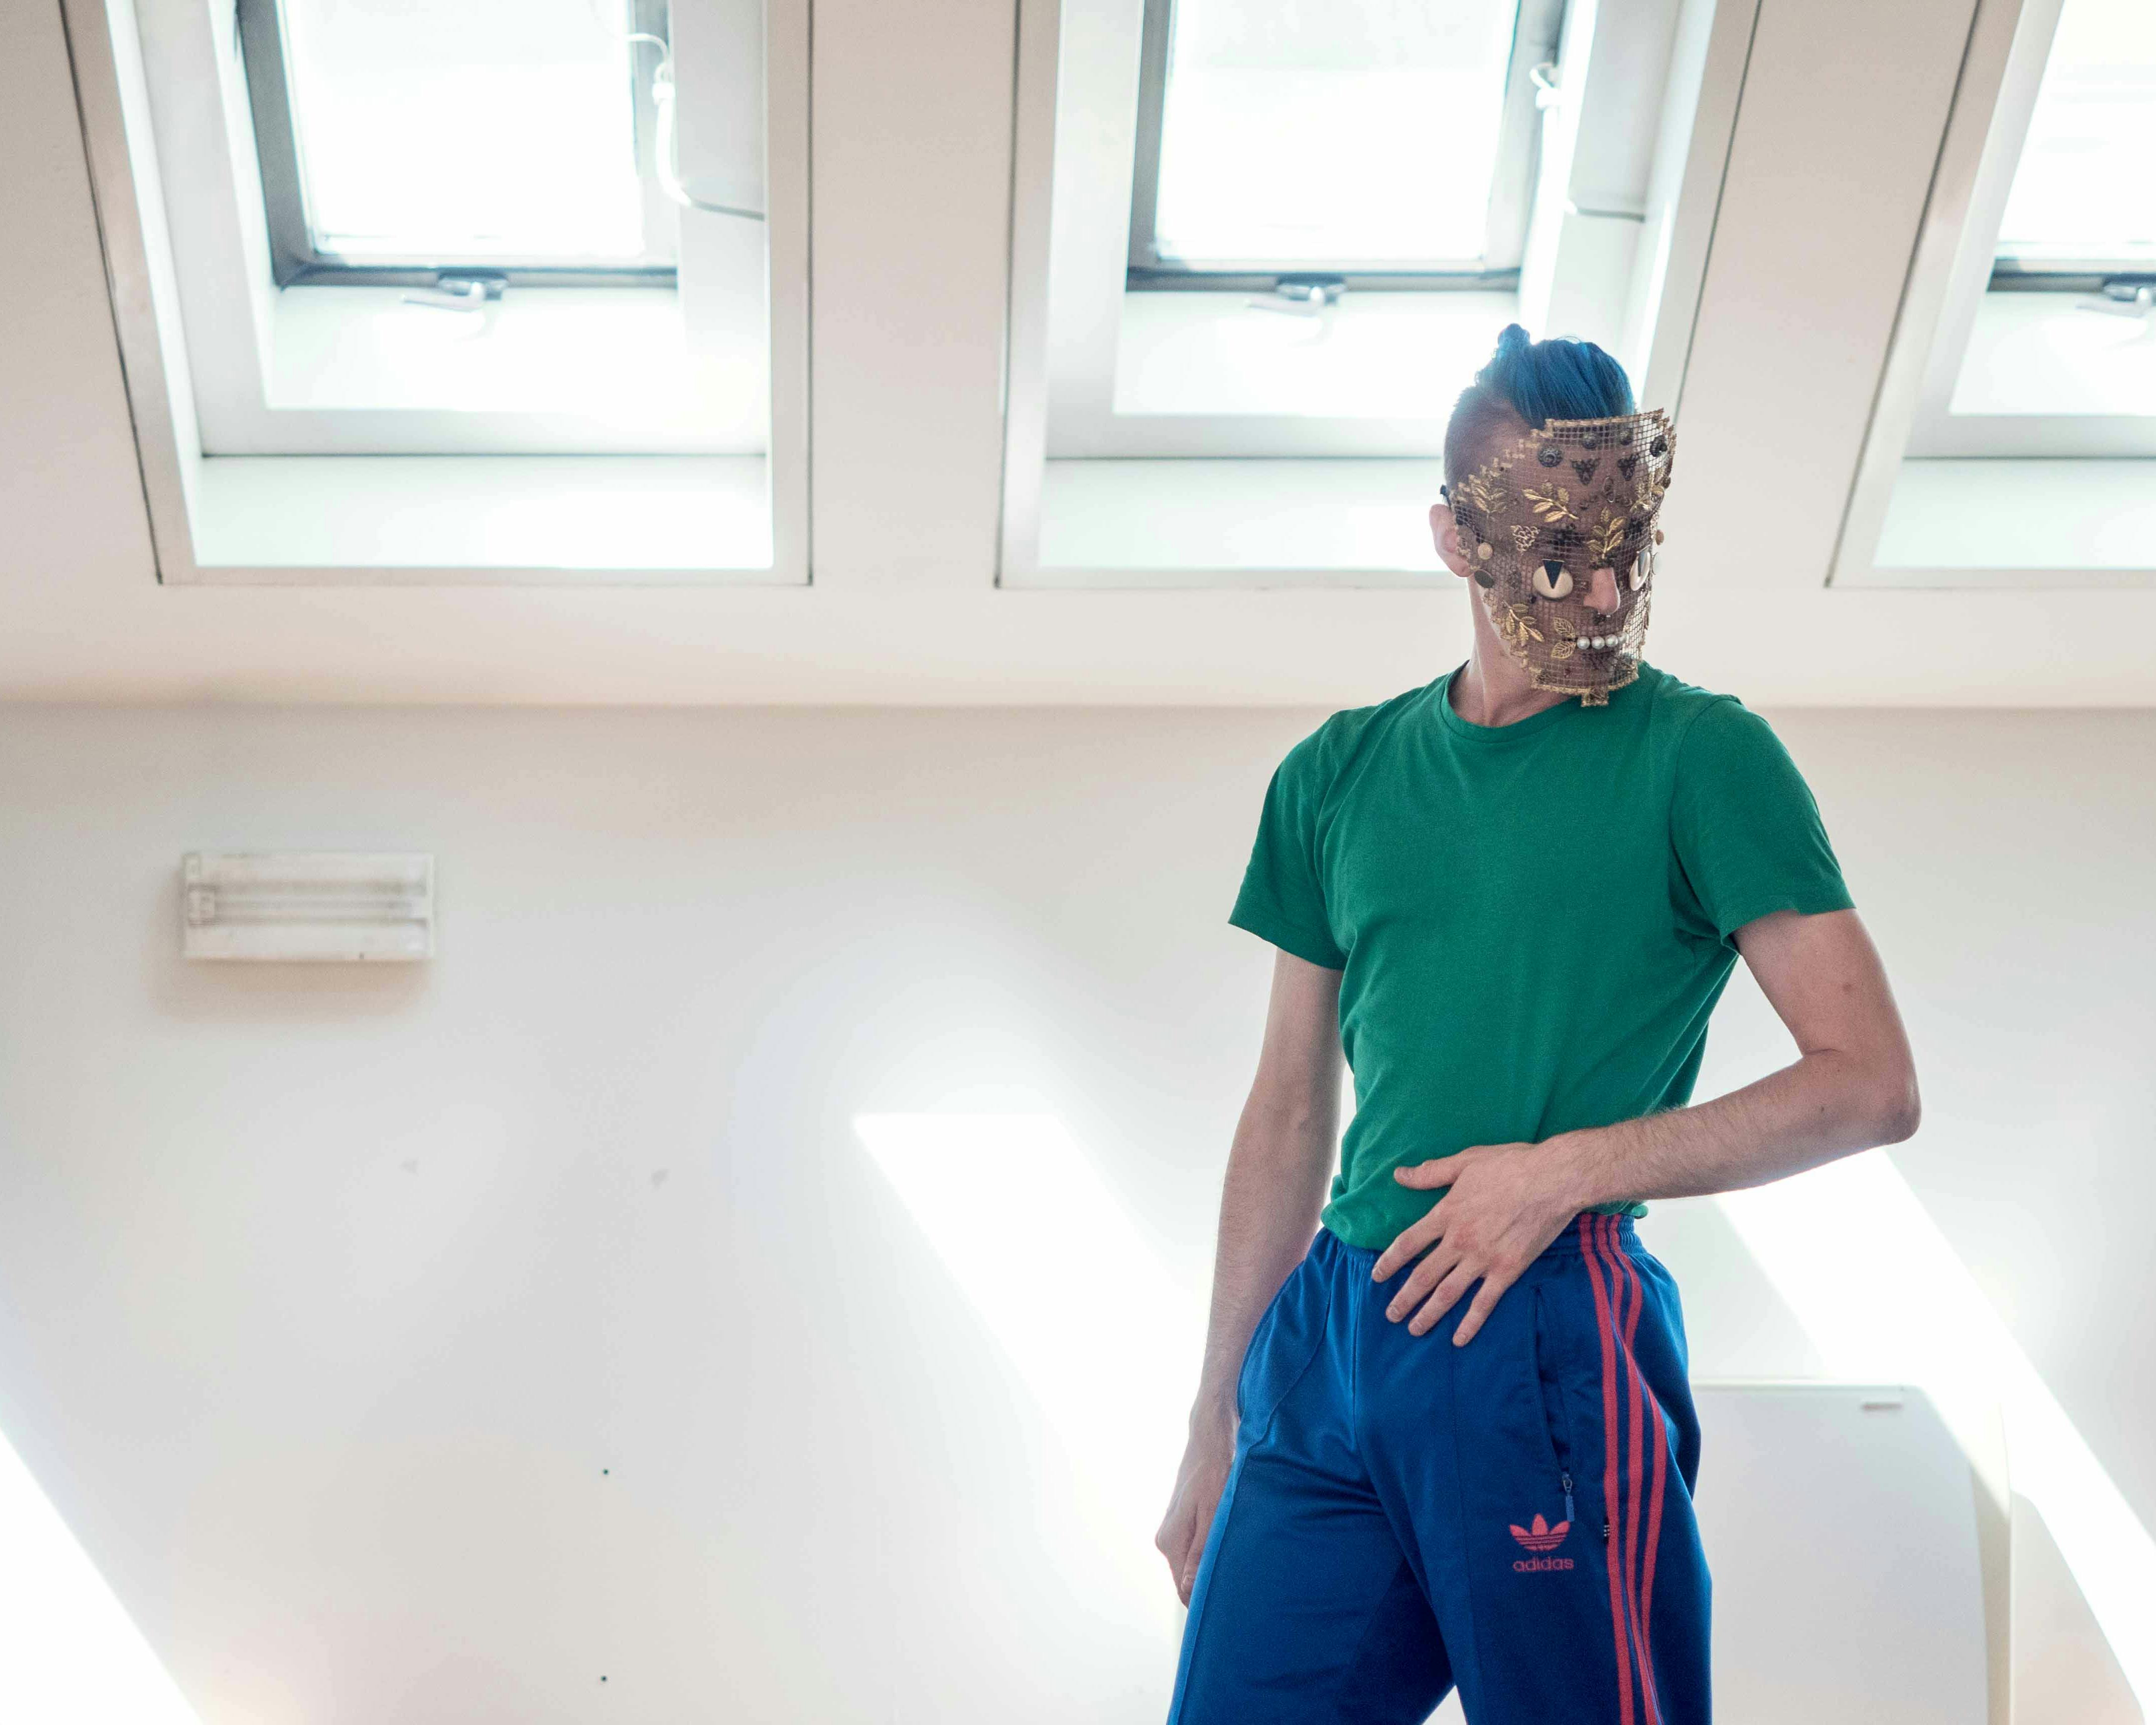 Nicola Galli, in the Studio, wearing one of his masks from "Il mondo altrove". He's dressed in a forensic green shirt and a blue jumpsuit.